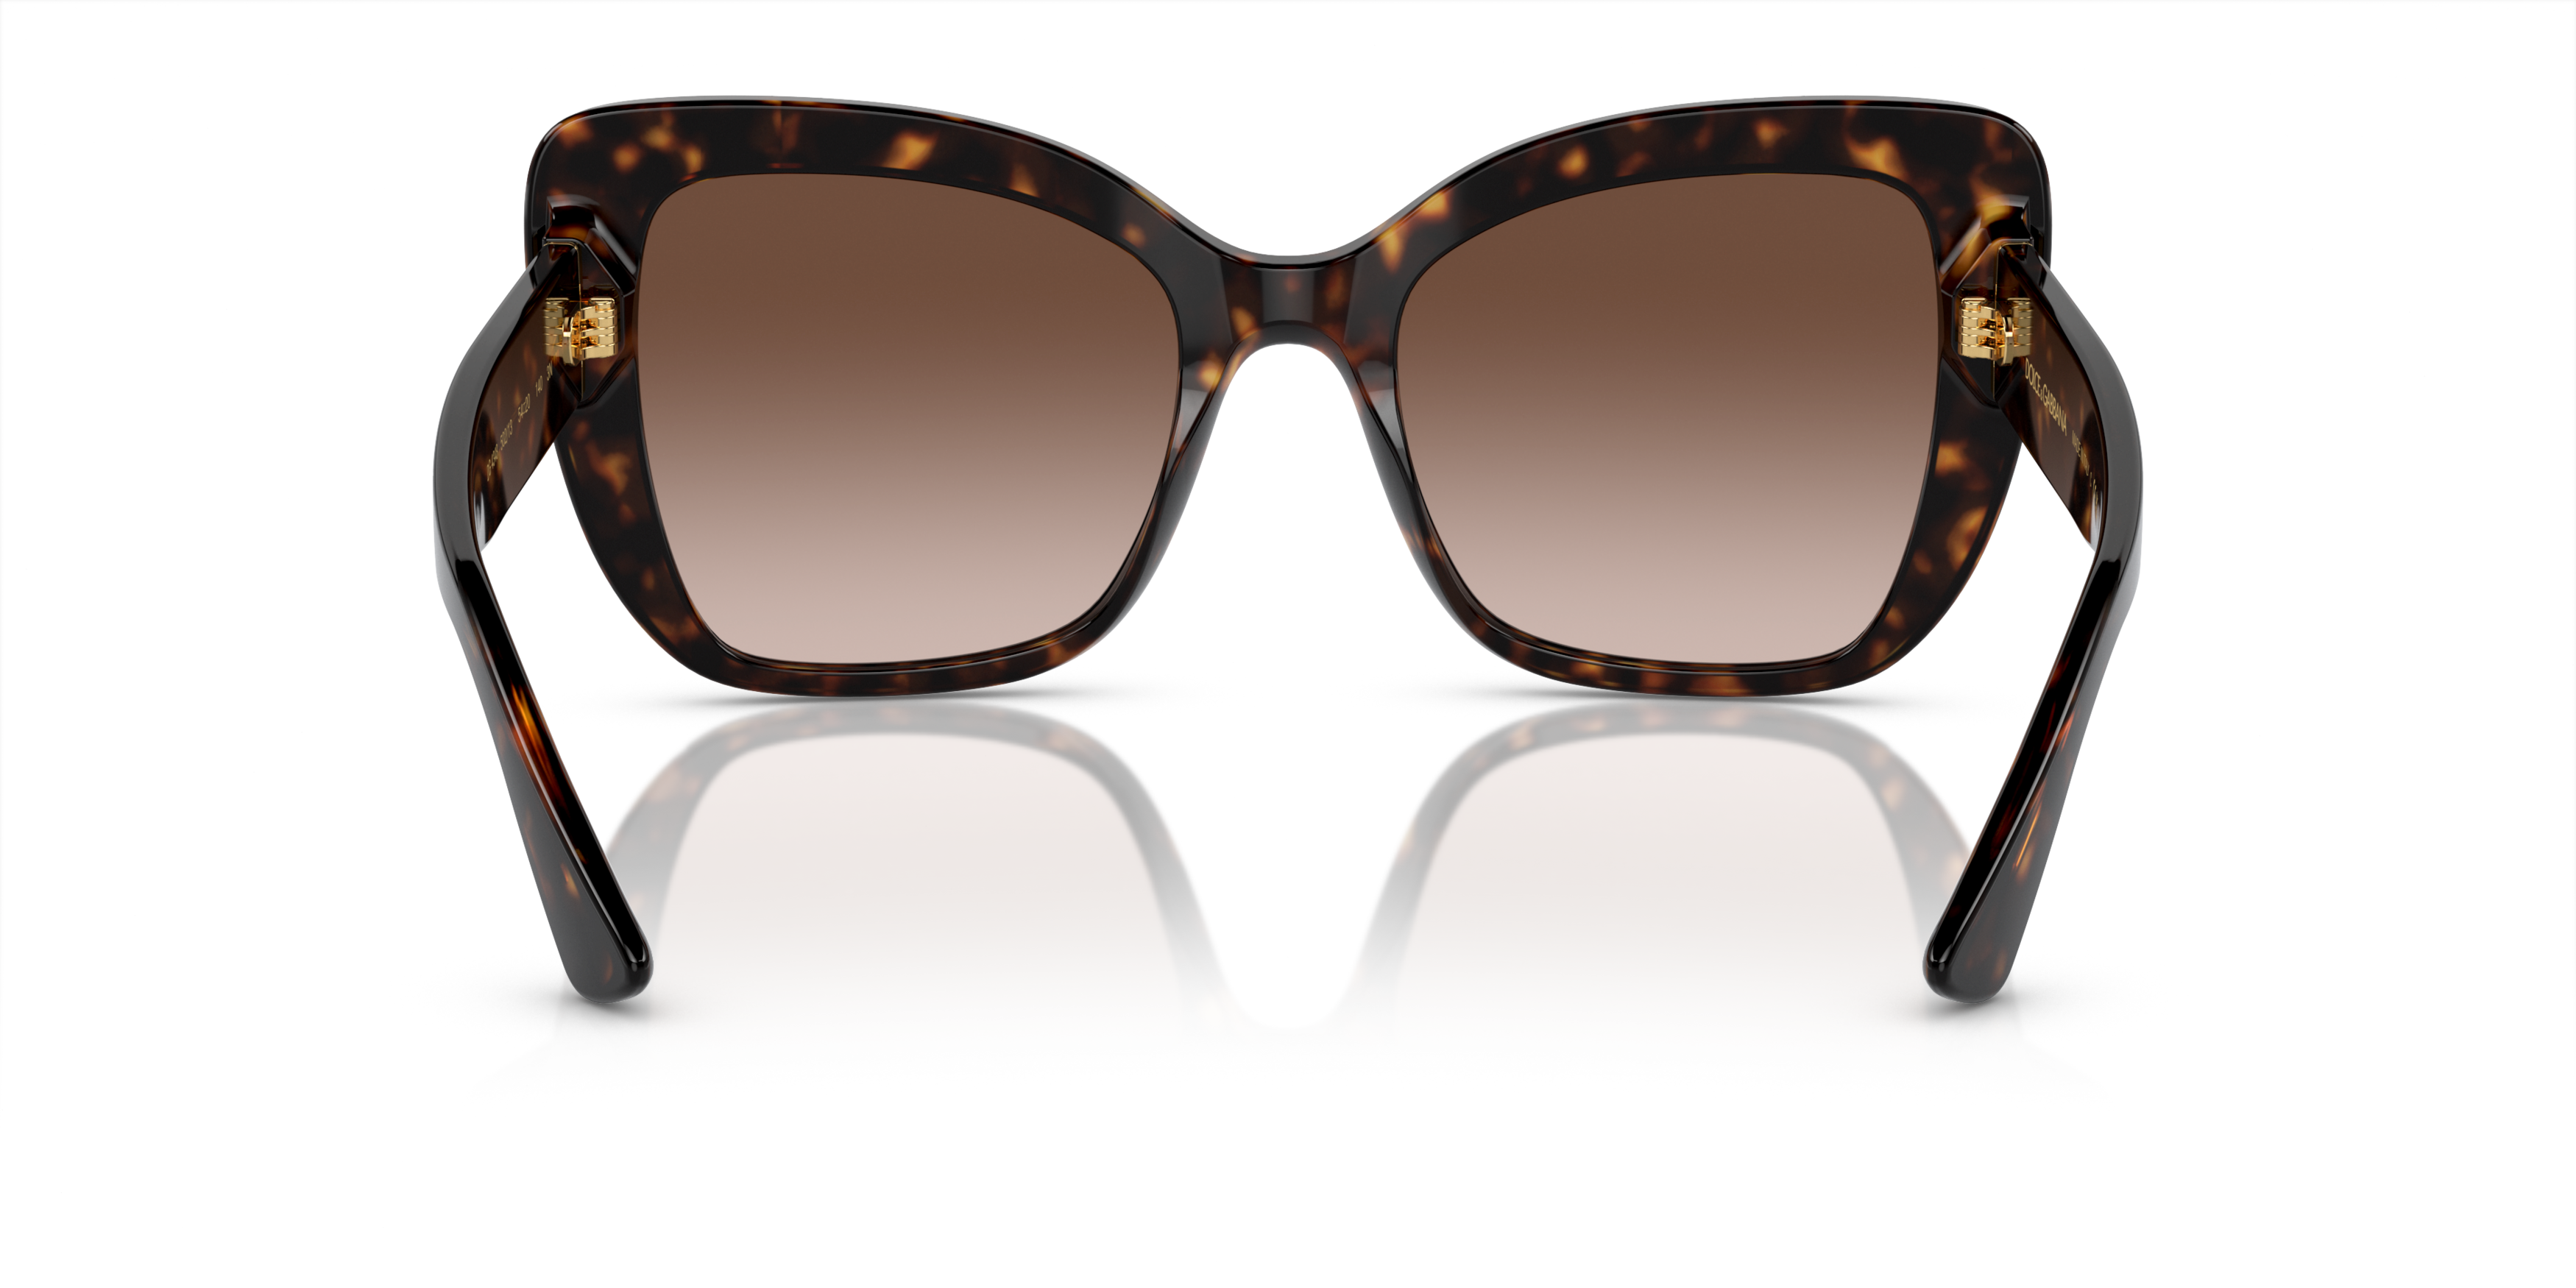 [products.image.detail02] DOLCE & GABBANA DG4348 502/13